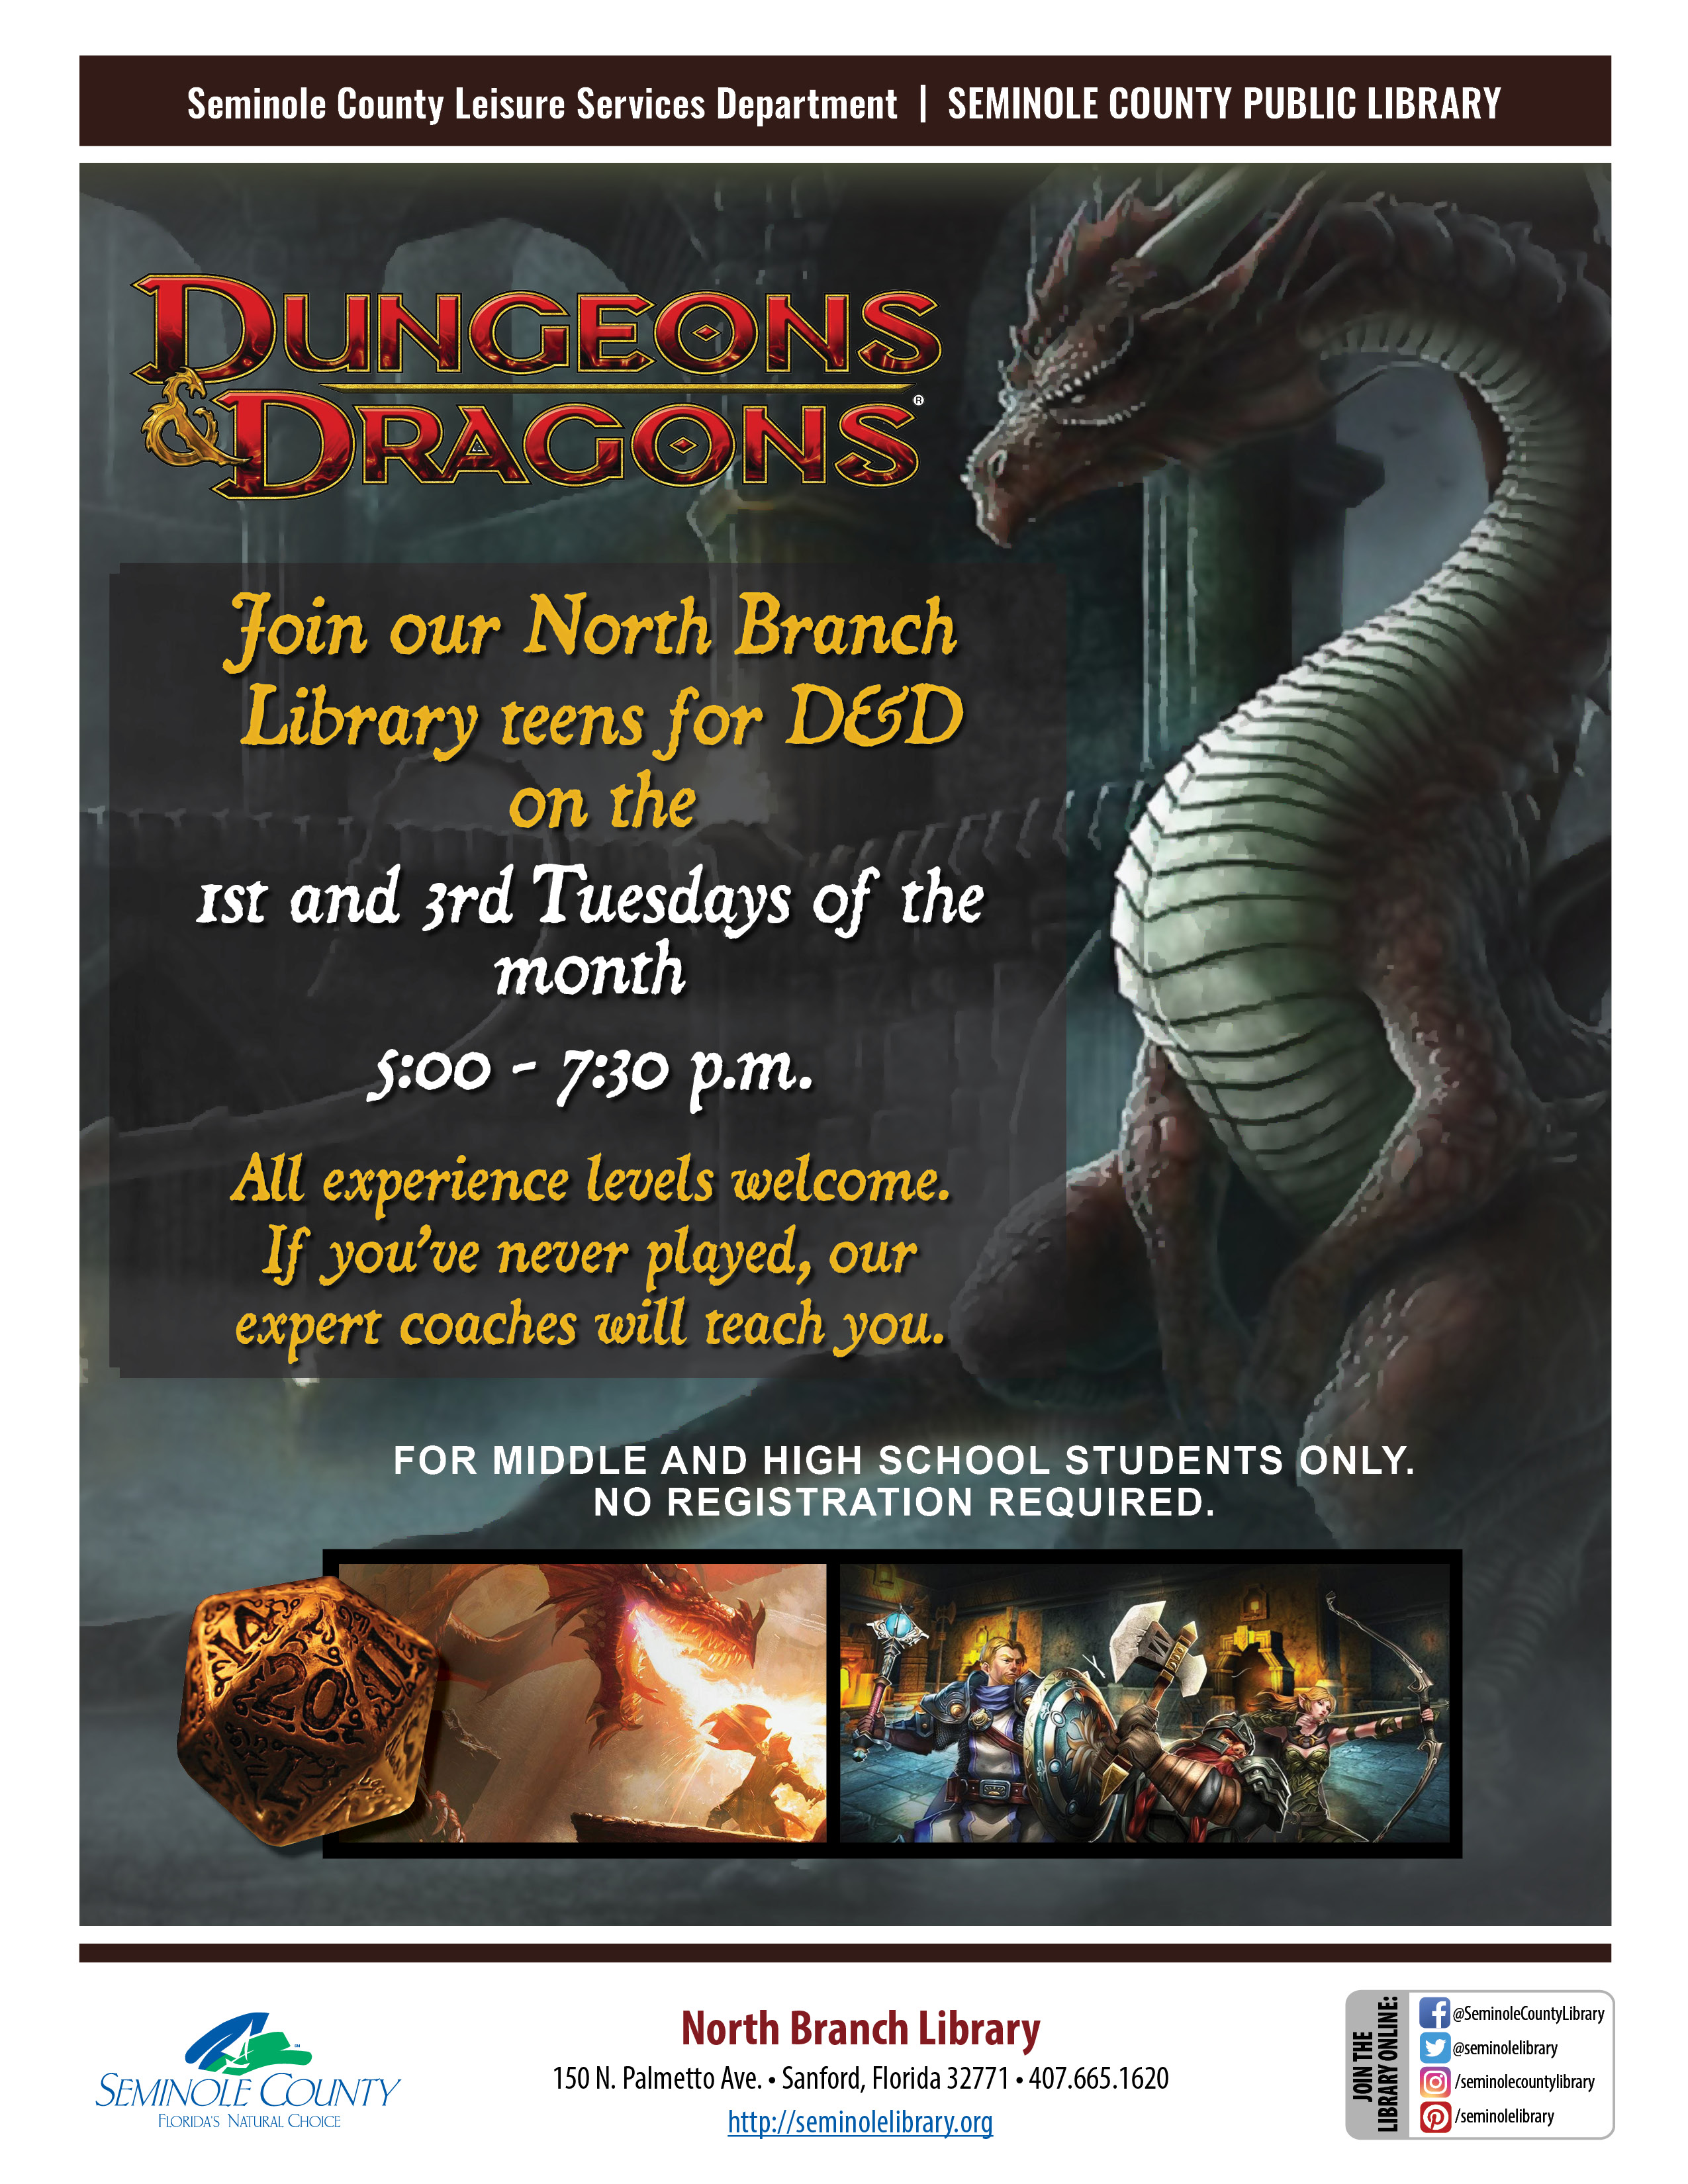 Dungeons & Dragons for Teens - North Branch Library